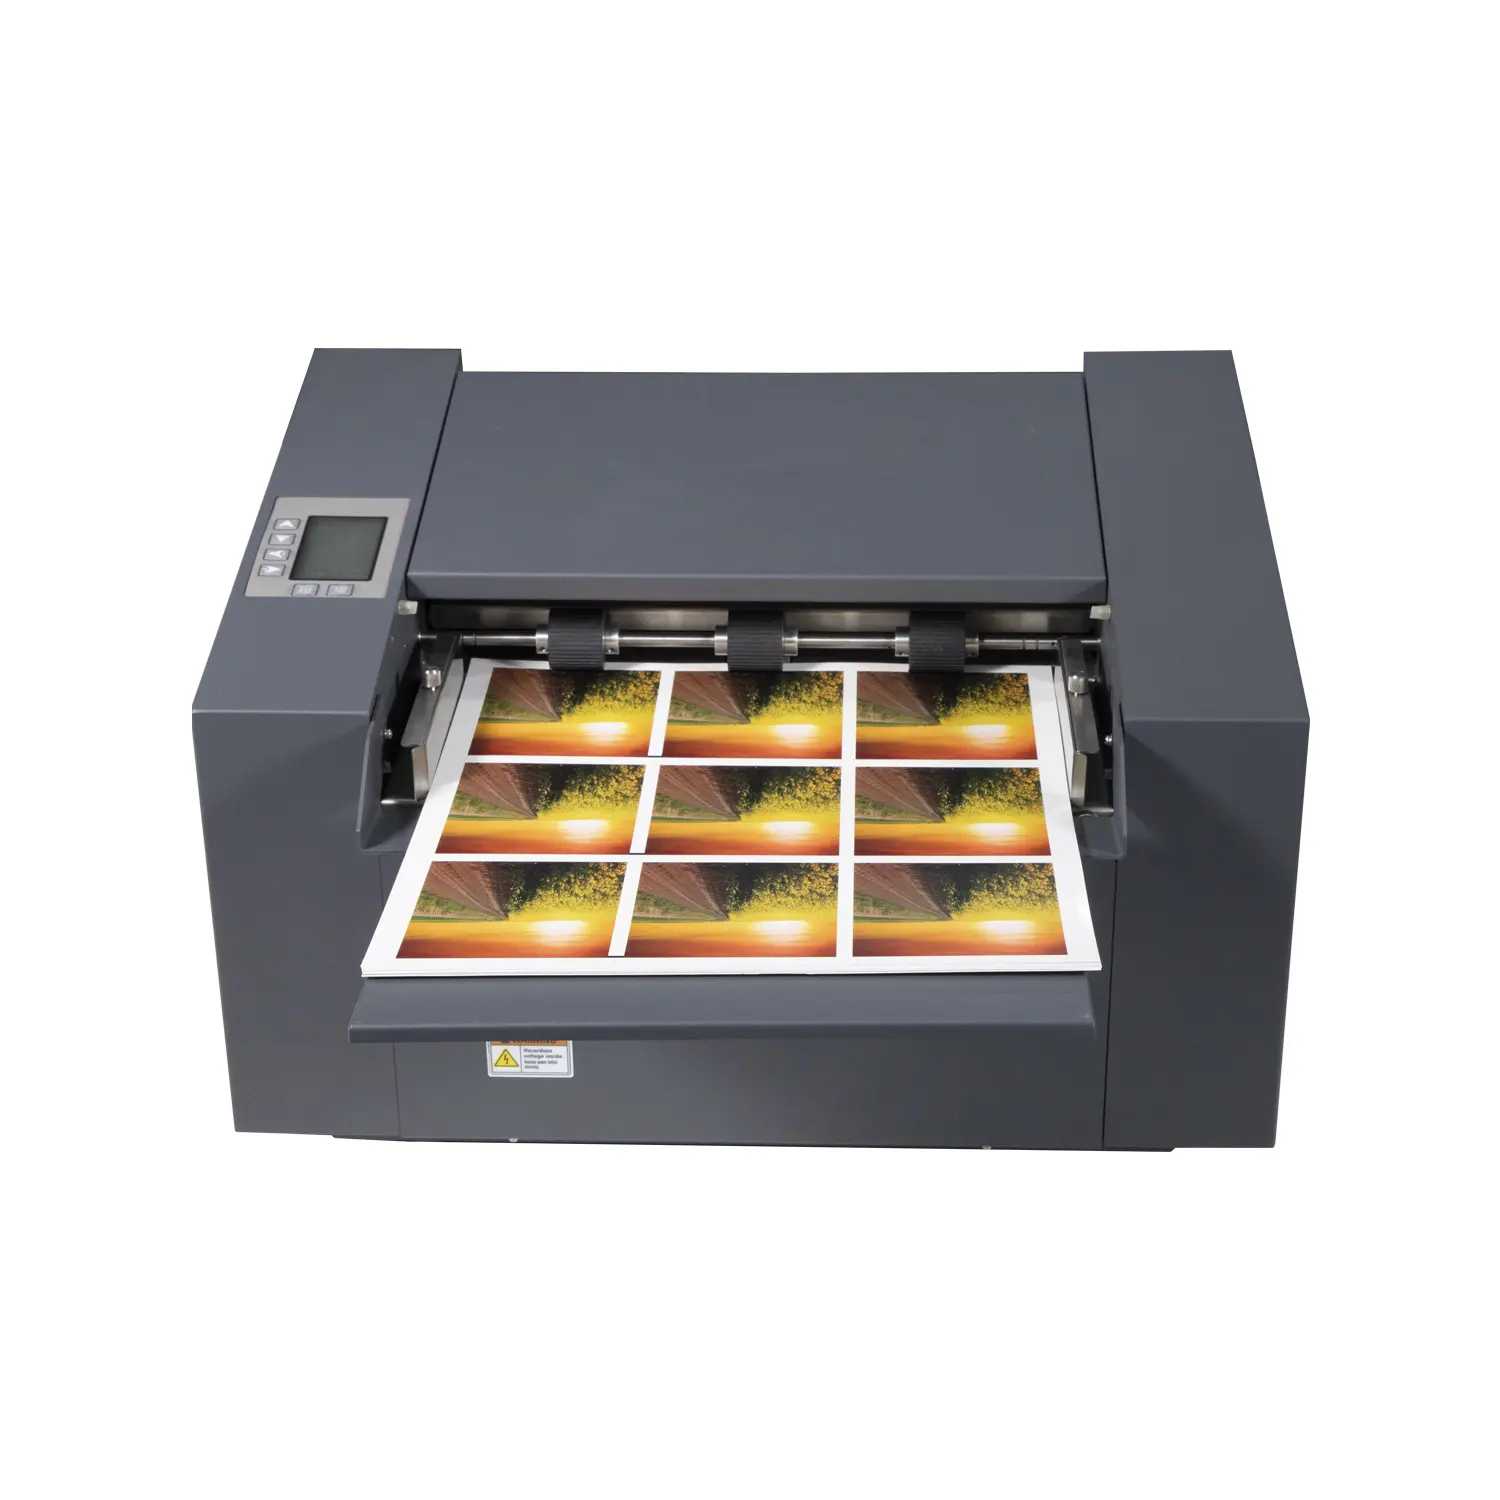 Multi-Functional Card Slitter CC-330 A3 Size Business Card Visit Card Cutter CC-330